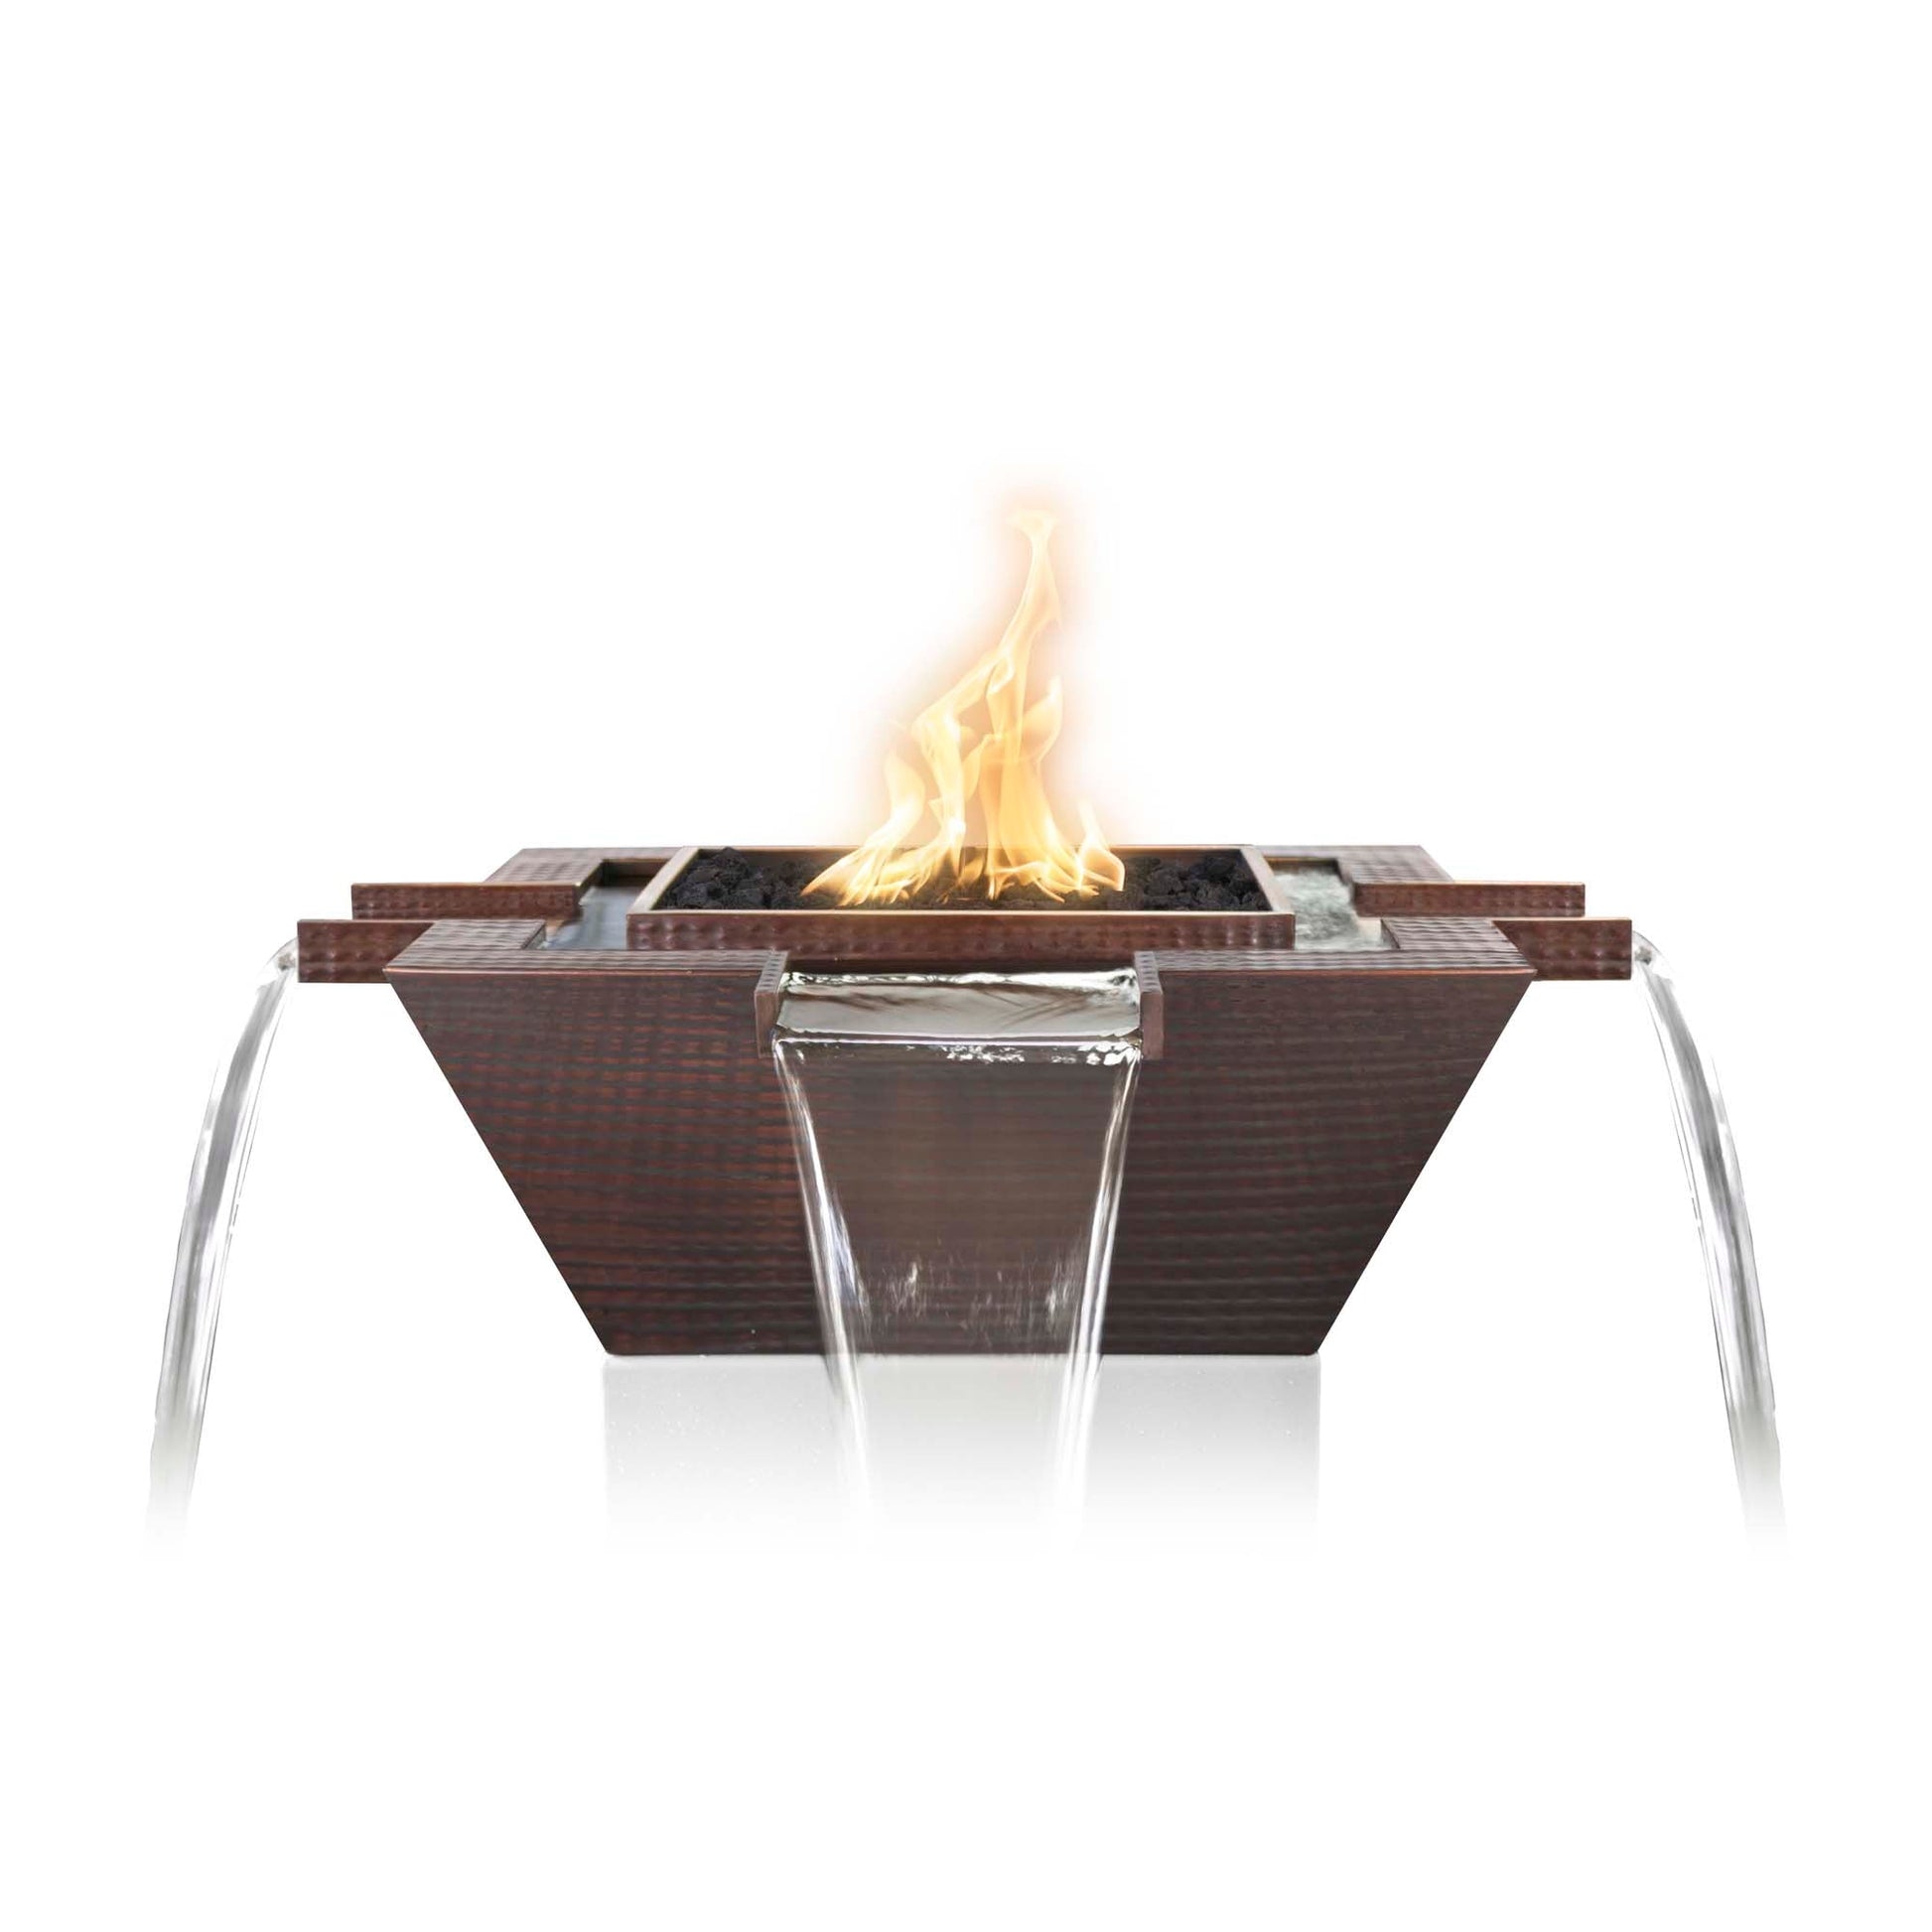 30" Maya Hammered Copper Fire & Water Bowl - 4-Way Spill - 12V Electronic Ignition-Novel Home